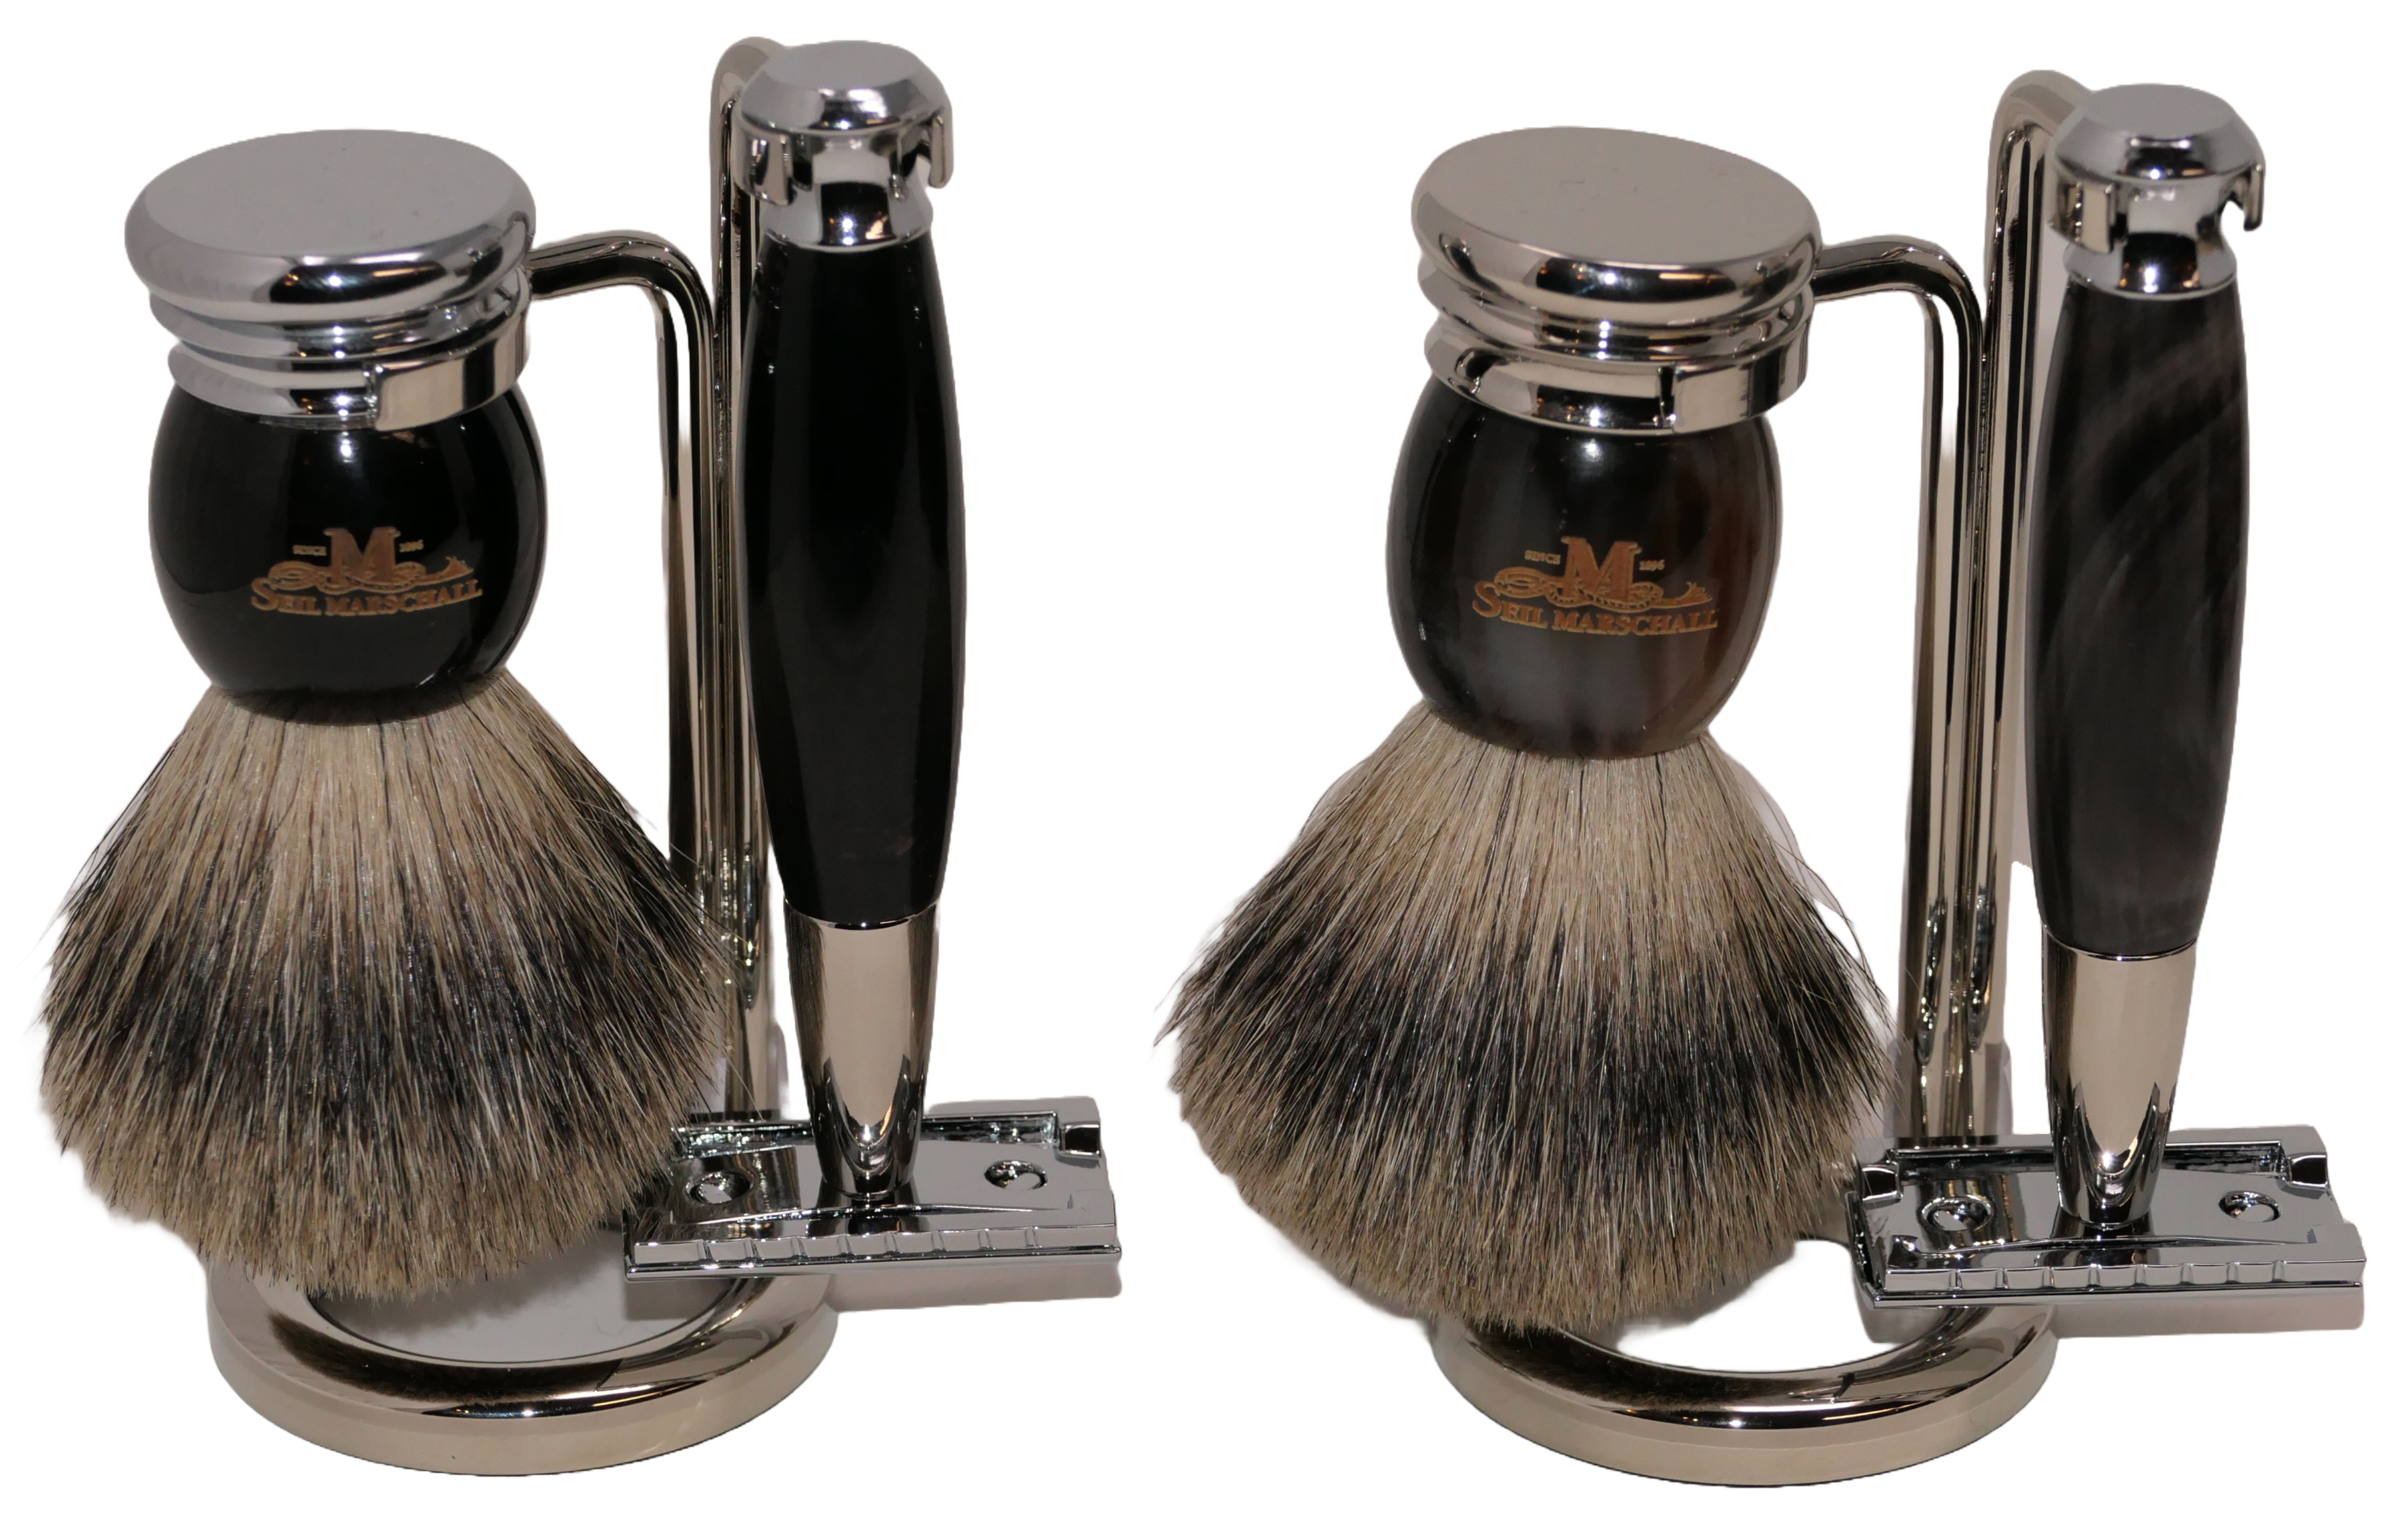 Exclusive Shavingset in Real Horn